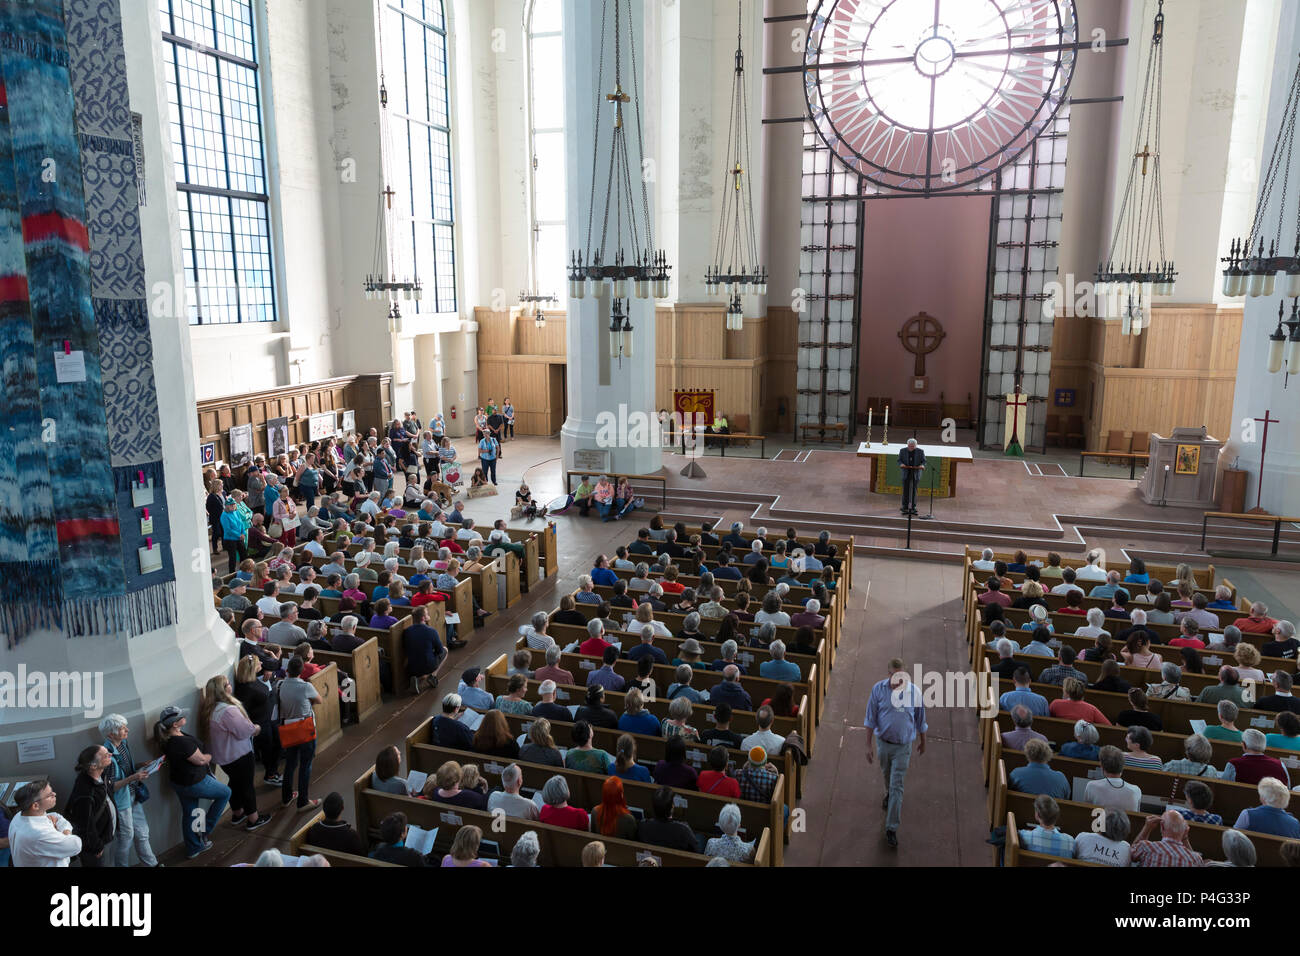 Seattle, USA. 21 June 2018. Hundreds of supporters gathered at St. Mark's Episcopal Cathedral in Capitol Hill for an interfaith prayer and vigil in support of migrants and asylum-seekers who come to the U.S. and to protest the inhumane separation of children from their parents. The two mile 'Prayer and Procession for Families at the Border' began at Saint Mark’s Episcopal Cathedral in ended at St. James Roman Catholic Cathedral in First Hill. Credit: Paul Christian Gordon/Alamy Live News Stock Photo